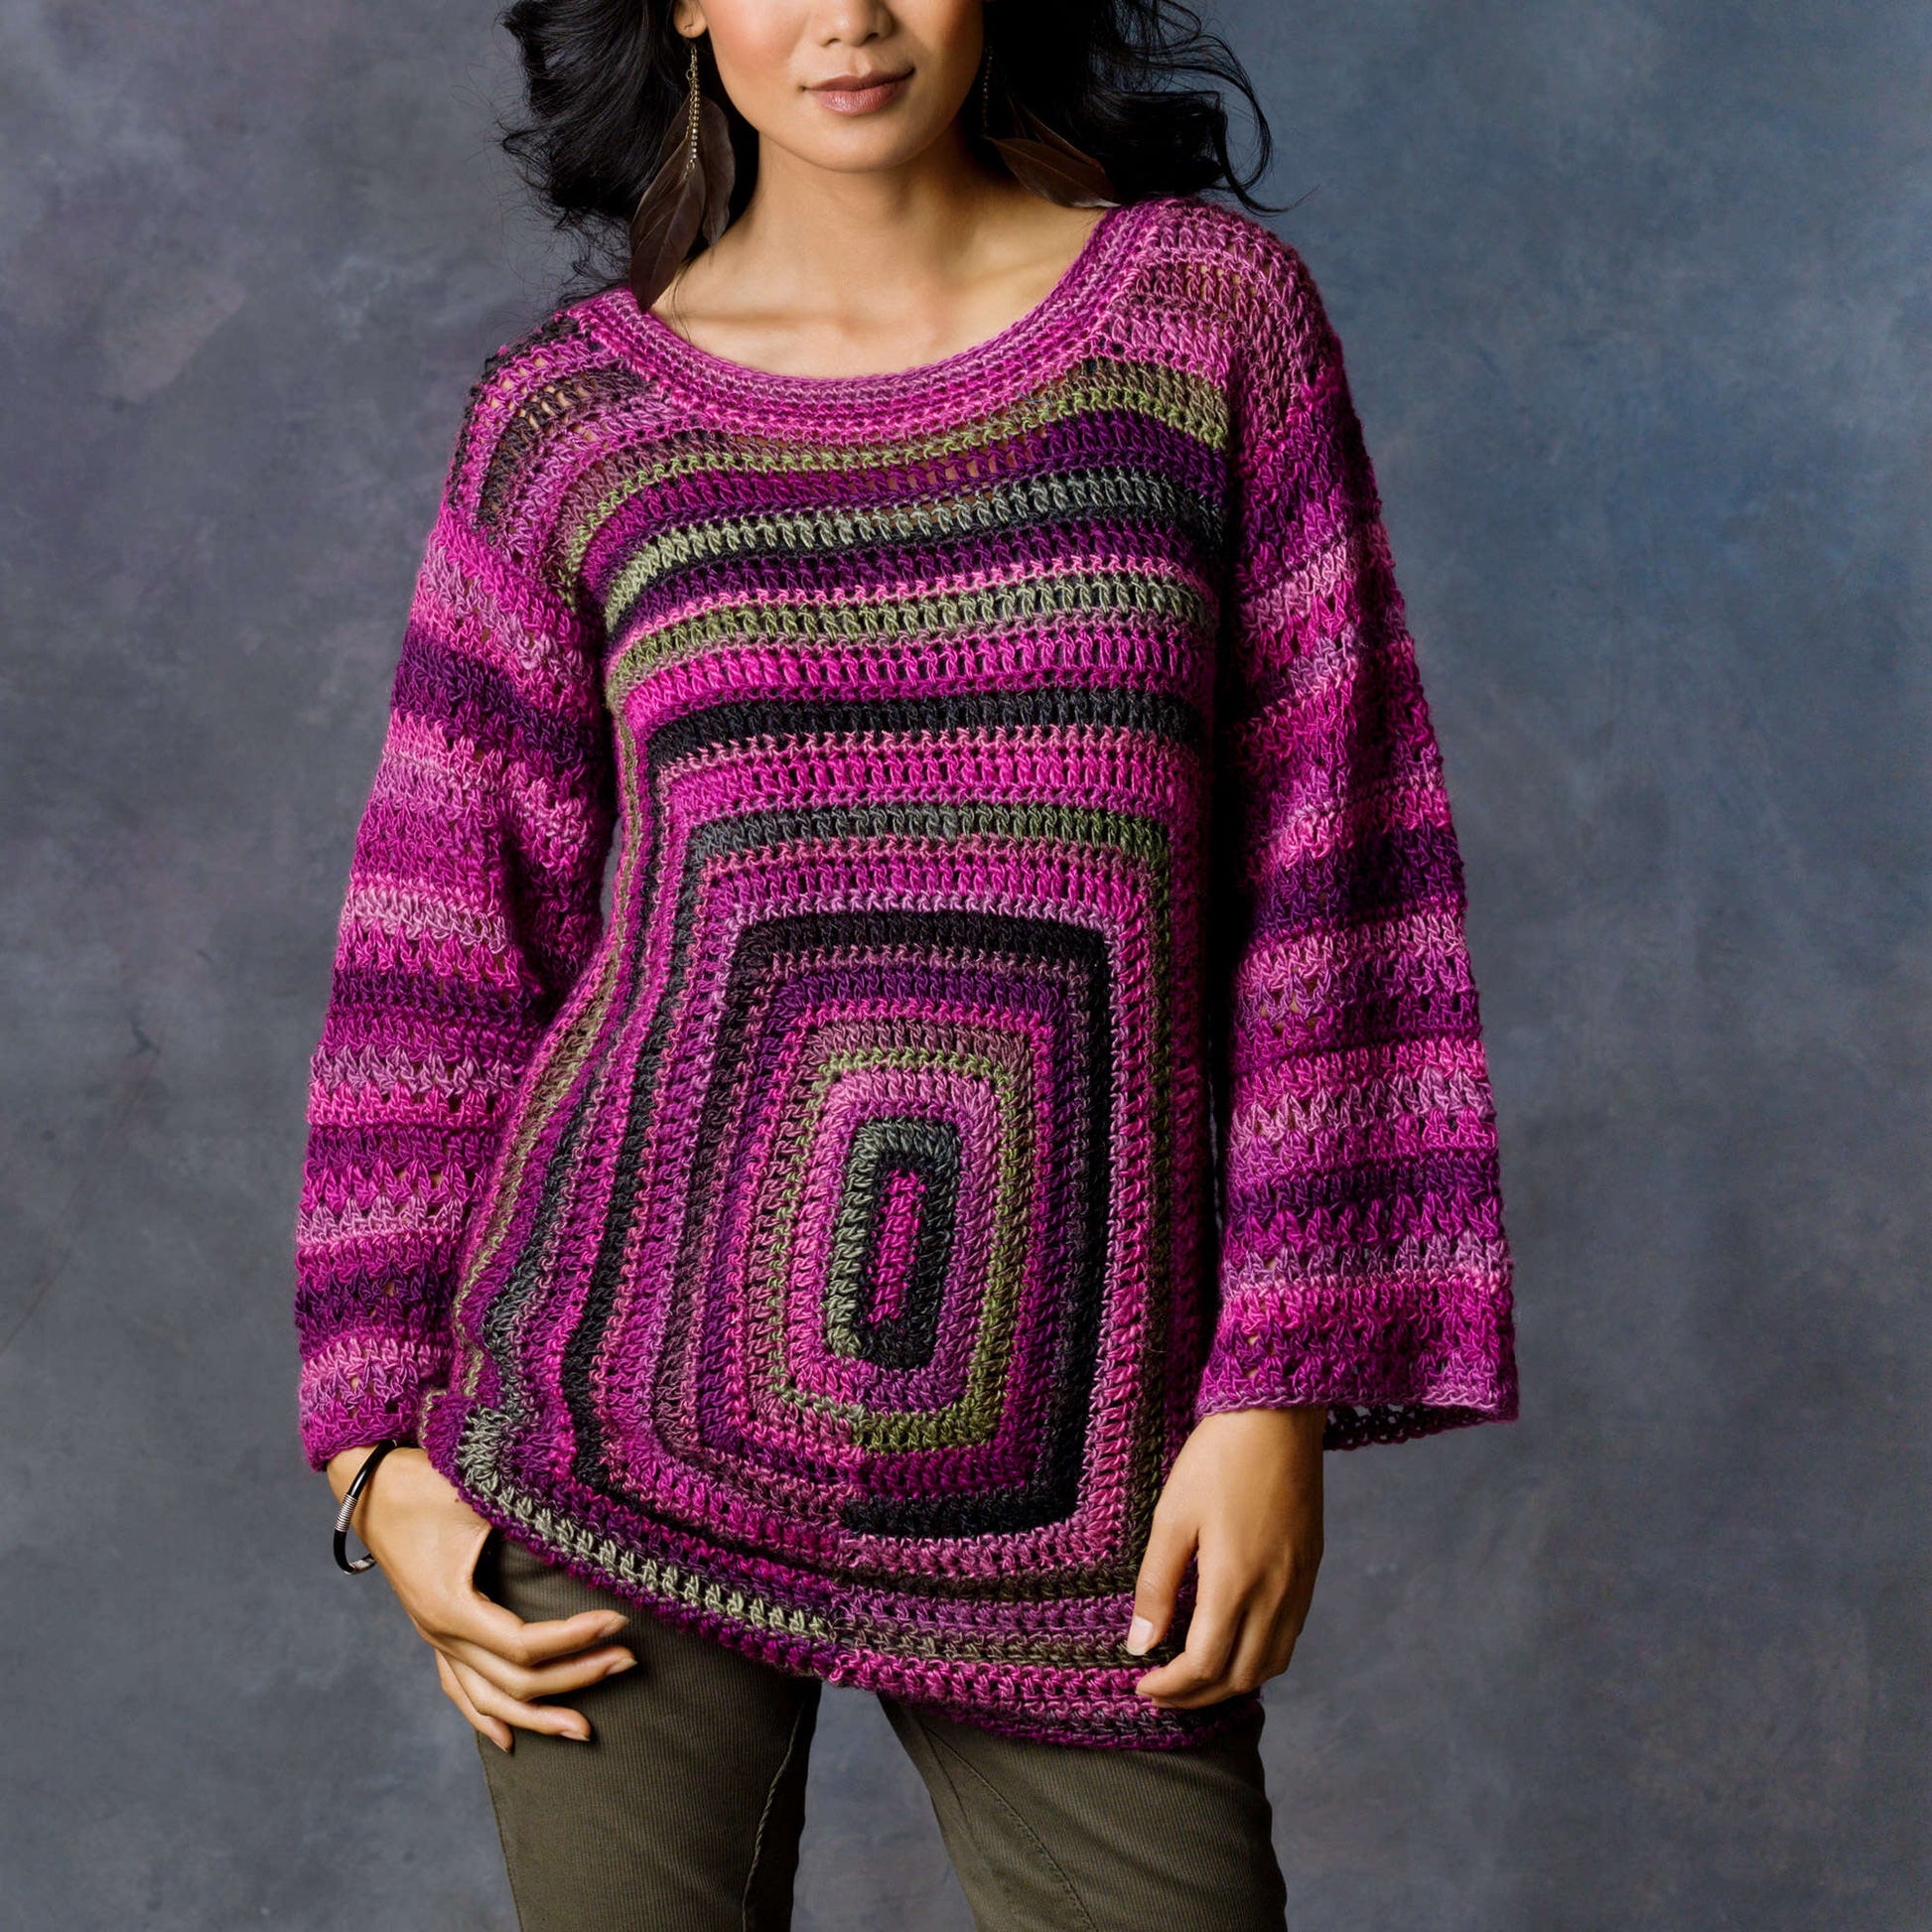 Free Red Heart Square Deal Sweater Crochet Pattern